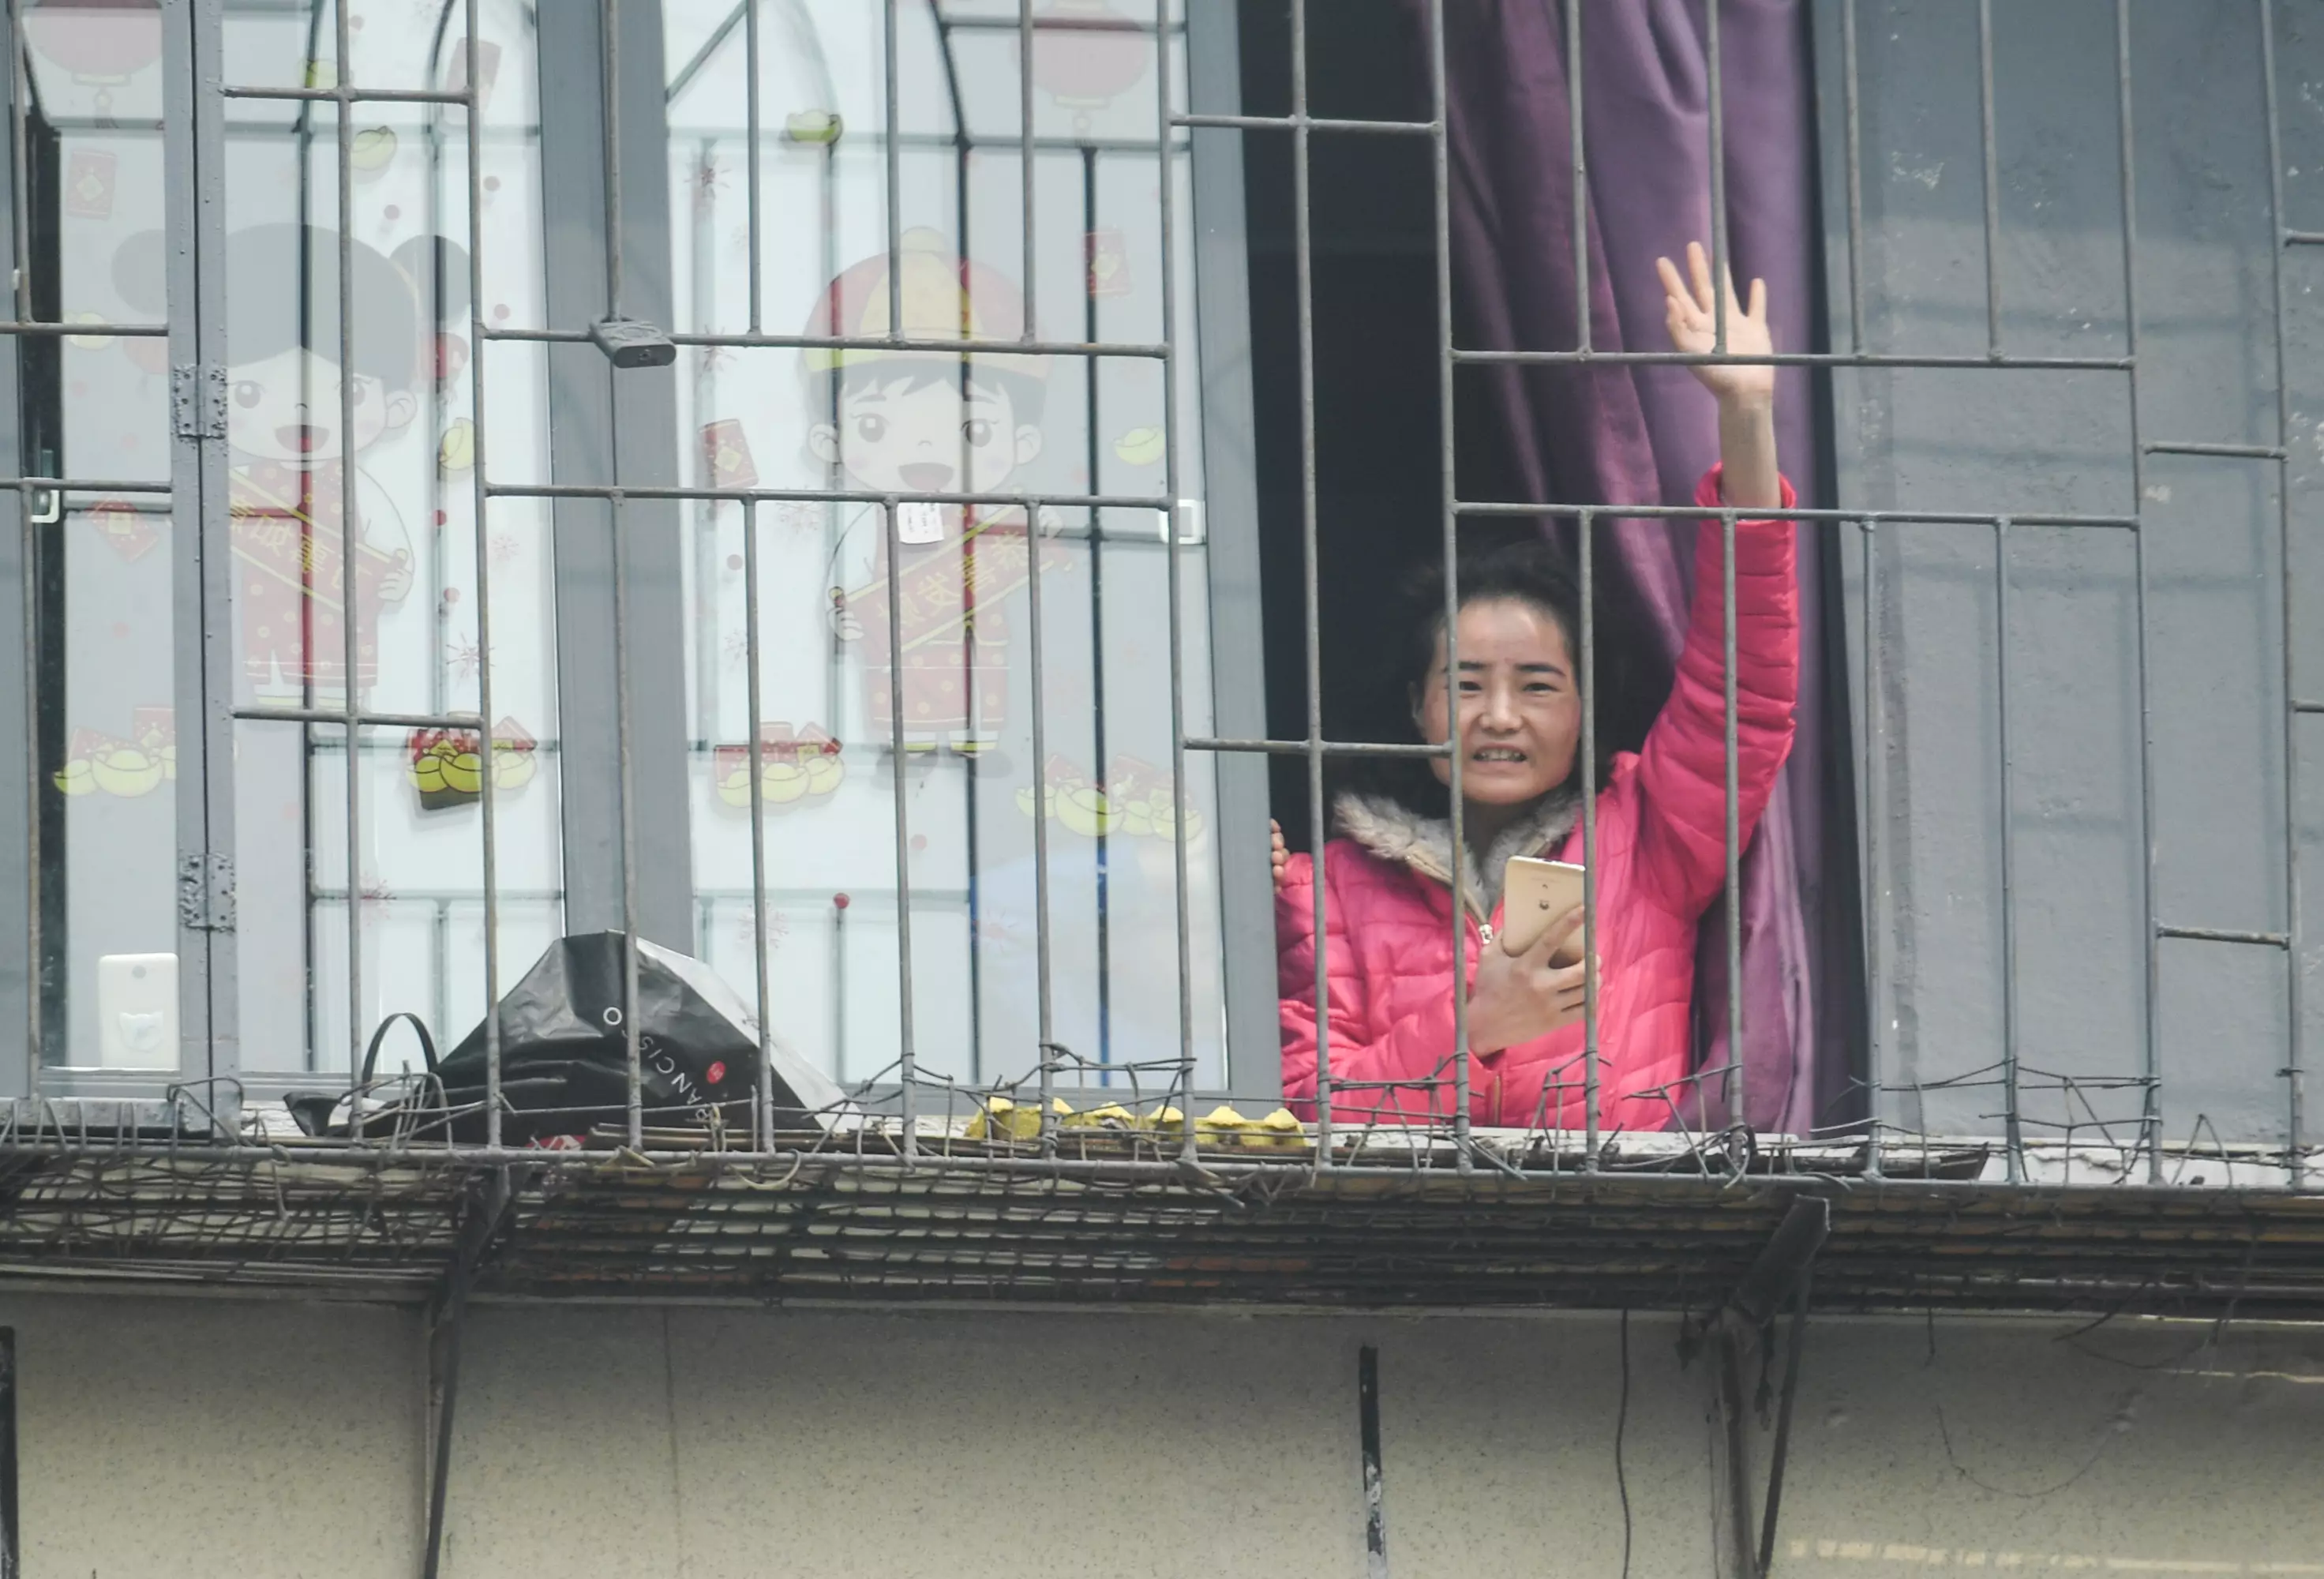 Residents in Wuhan are still on lockdown until early April (